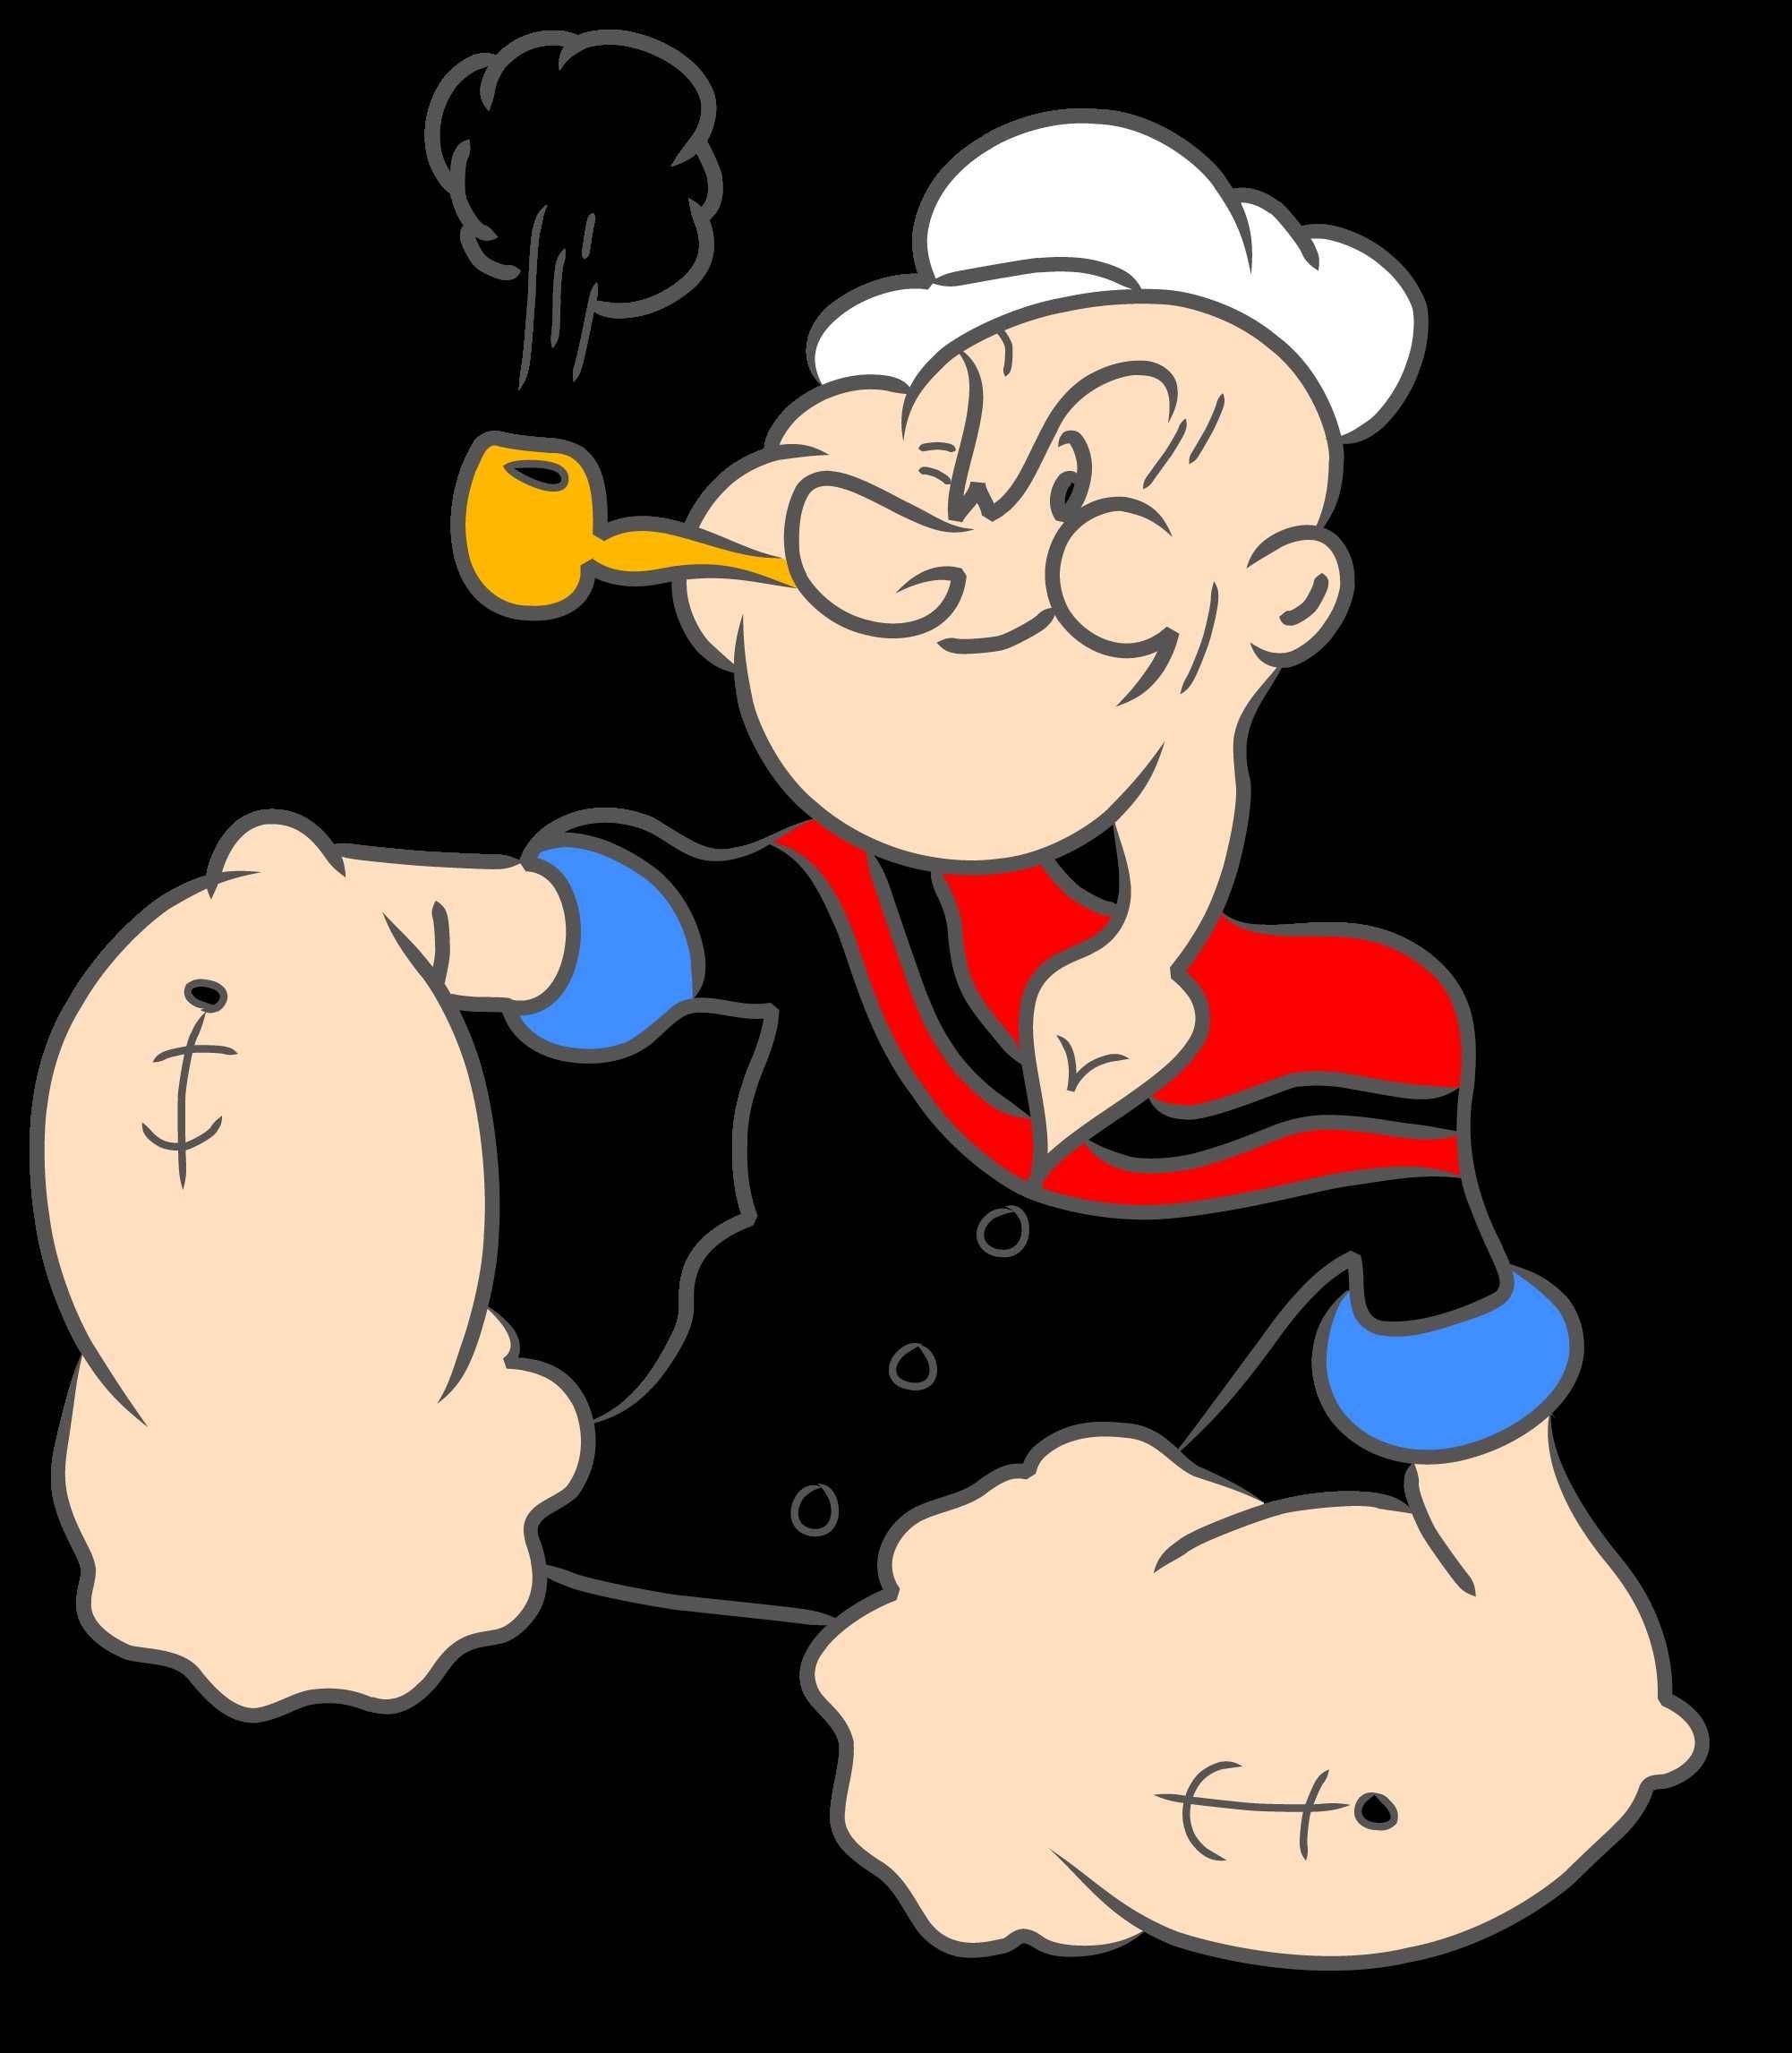 Popeye the Sailor Animation, Popeye the Sailor Man, Wallpapers, Backgrounds, 2010x2300 HD Handy